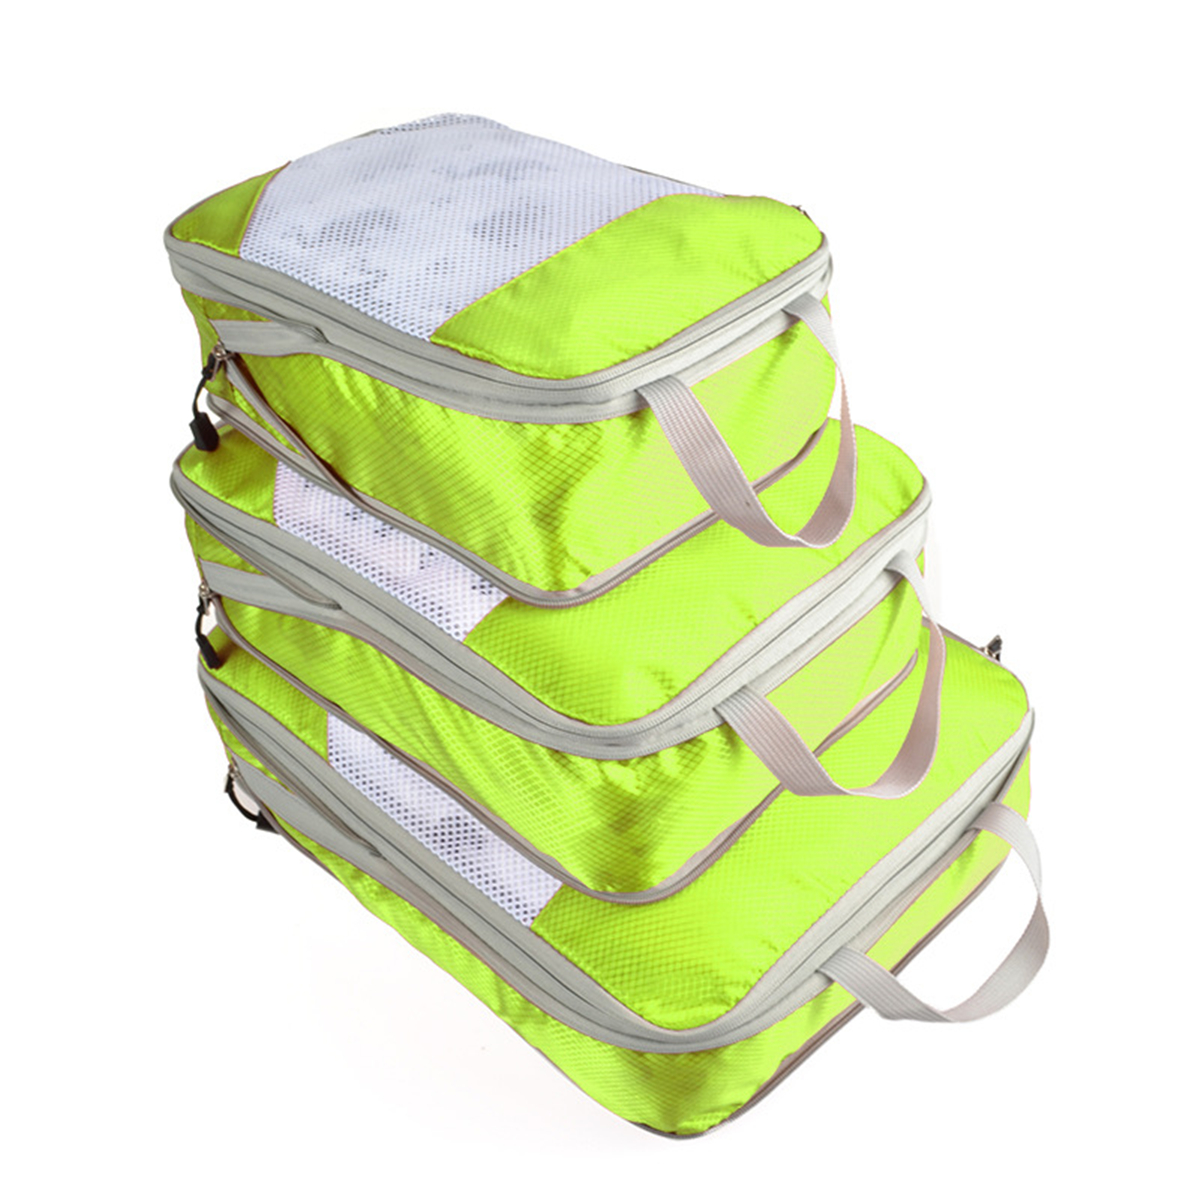 3PCS-Waterproof-Packing-Bags-Outdoor-Traveling-Luggage-Storage-Bag-Clothes-Bags-1603720-9